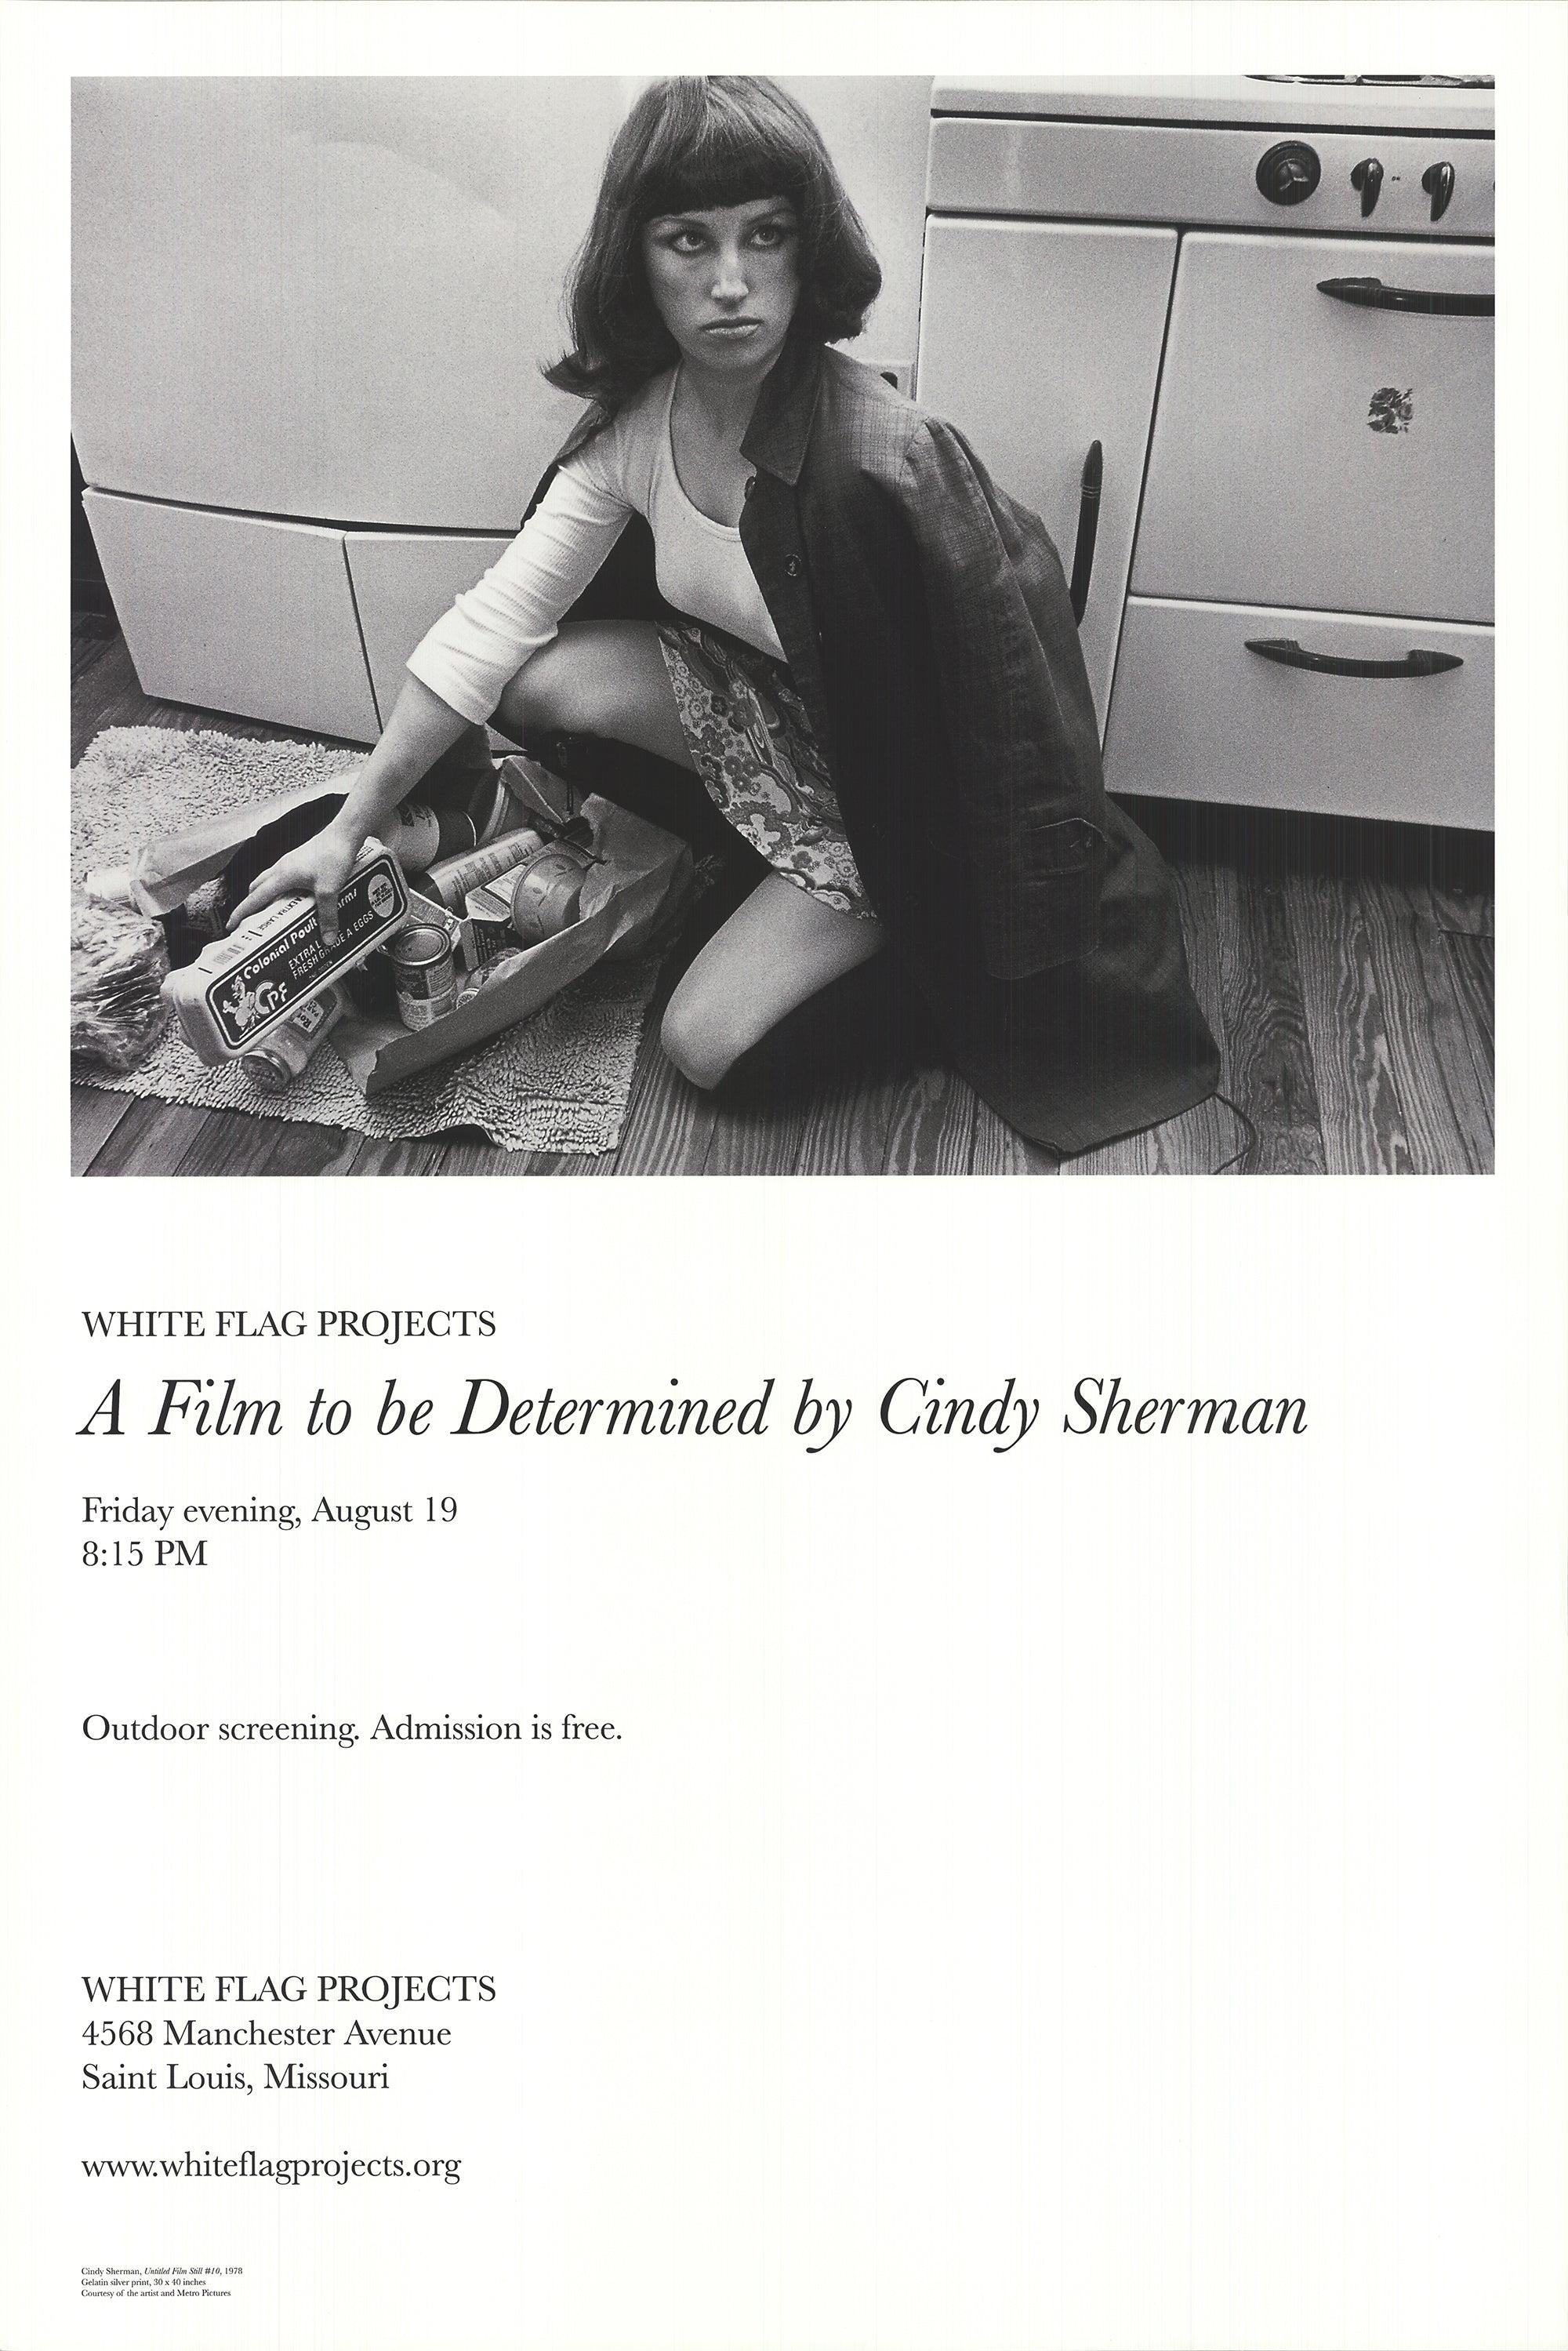 Cindy Sherman's 'Untitled Film Stills' Go to Auction - The New